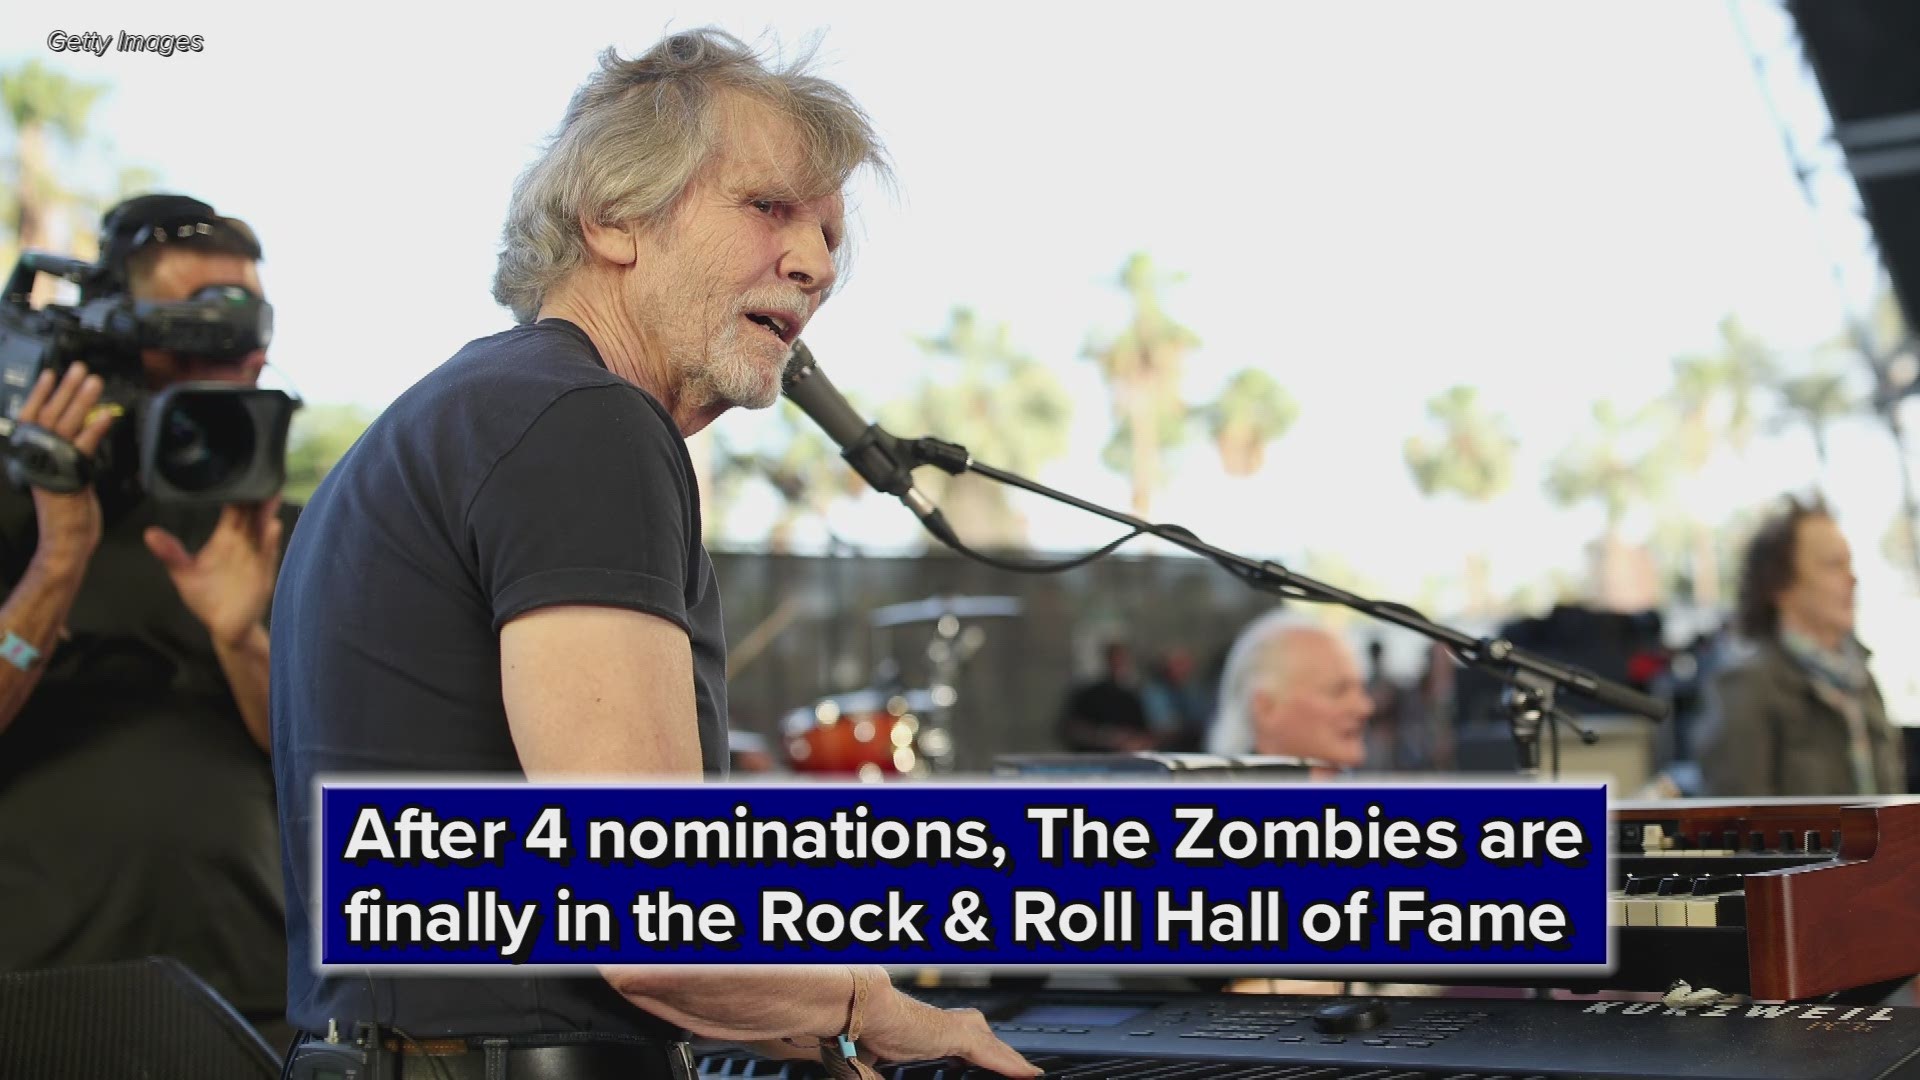 The iconic British Invasion group the Zombies finally get inducted in the Rock & Roll Hall of Fame